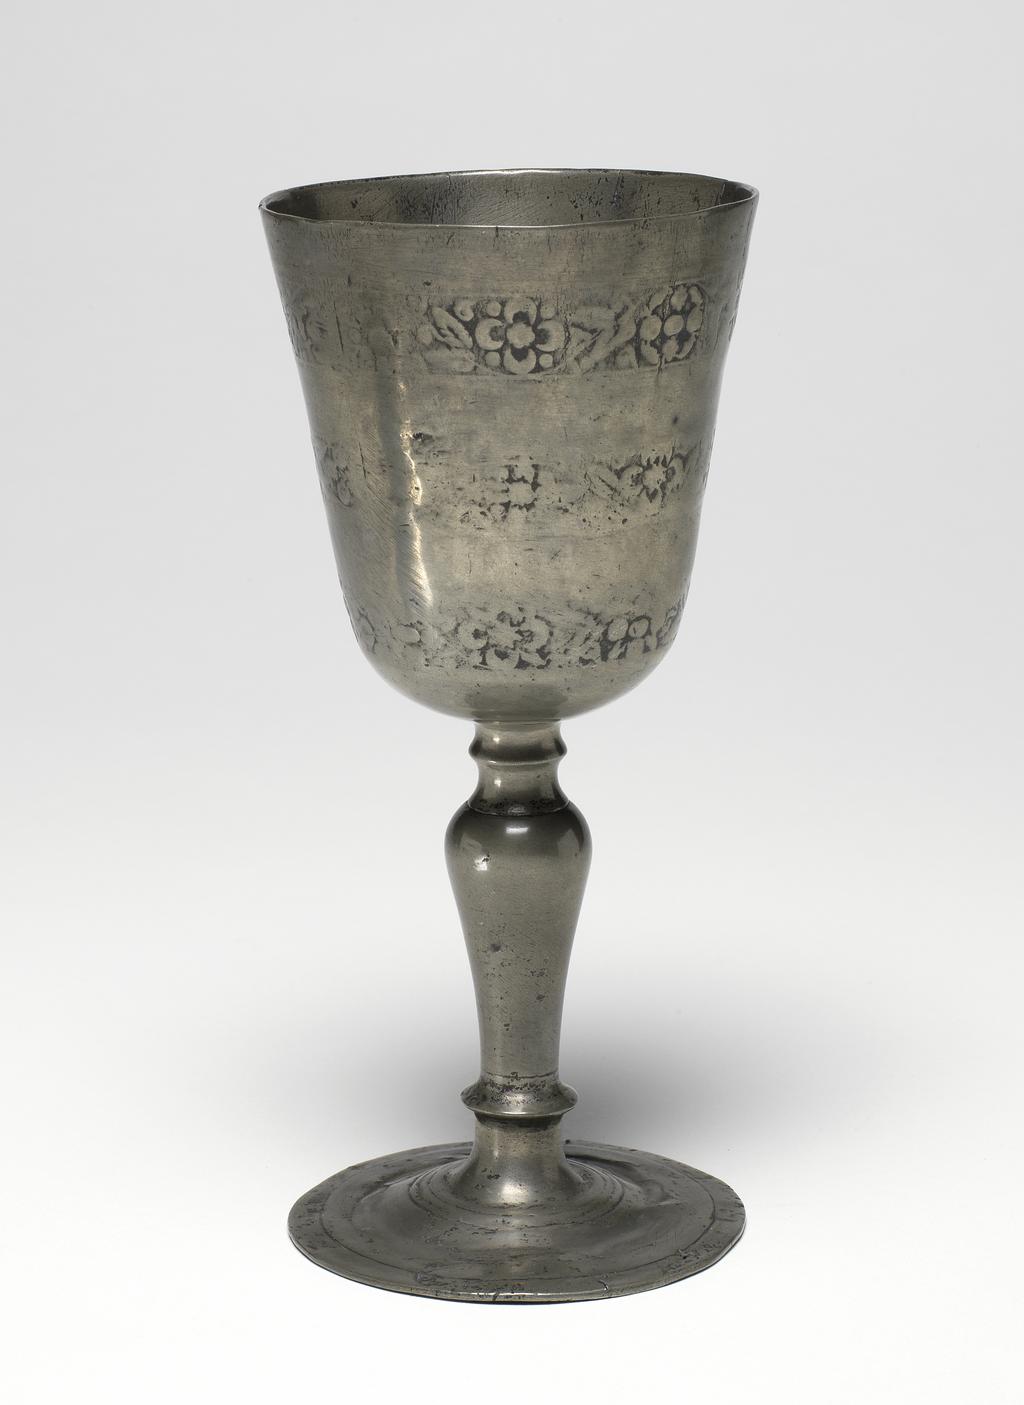 An image of Chalice. Pewter with relief decoration. The rounded conical bowl has three bands of floral motifs and is supported on a baluster stem and circular foot. Height (whole) 17.6 cm, diameter (rim) 8.2 cm, circa 1600 to 1620. English.